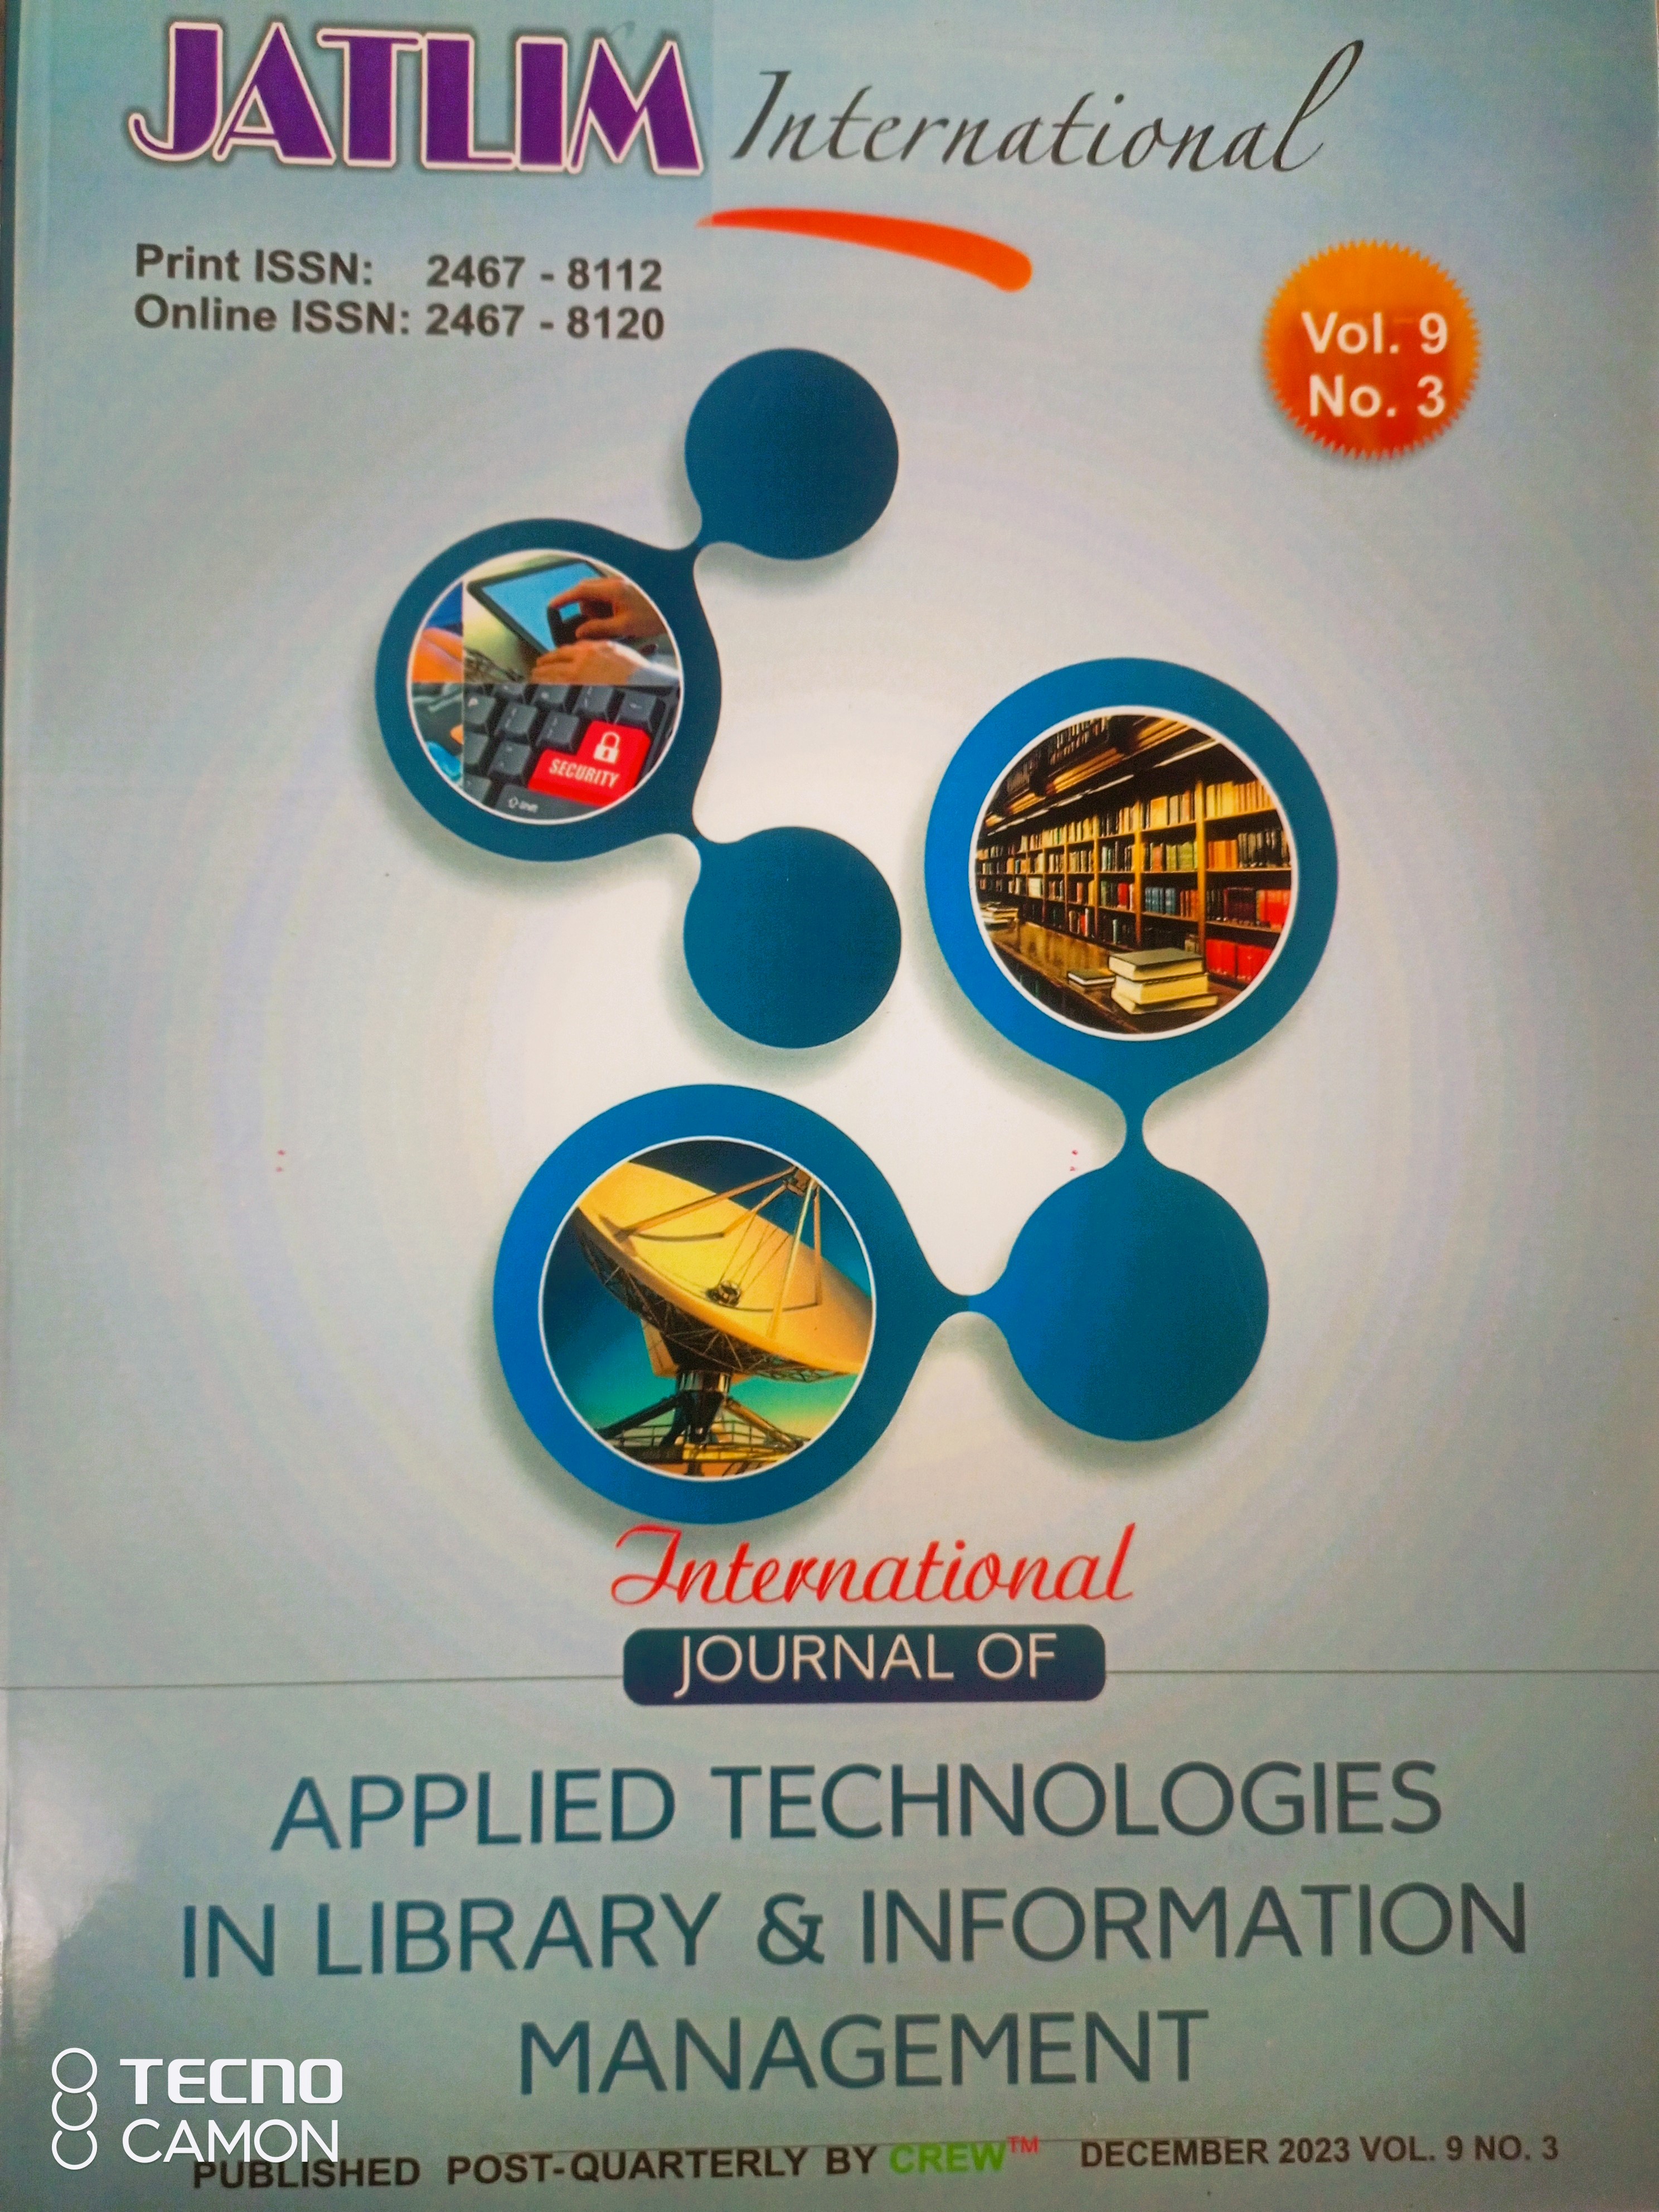 International Journal of Applied Technologies in Library and Information Management